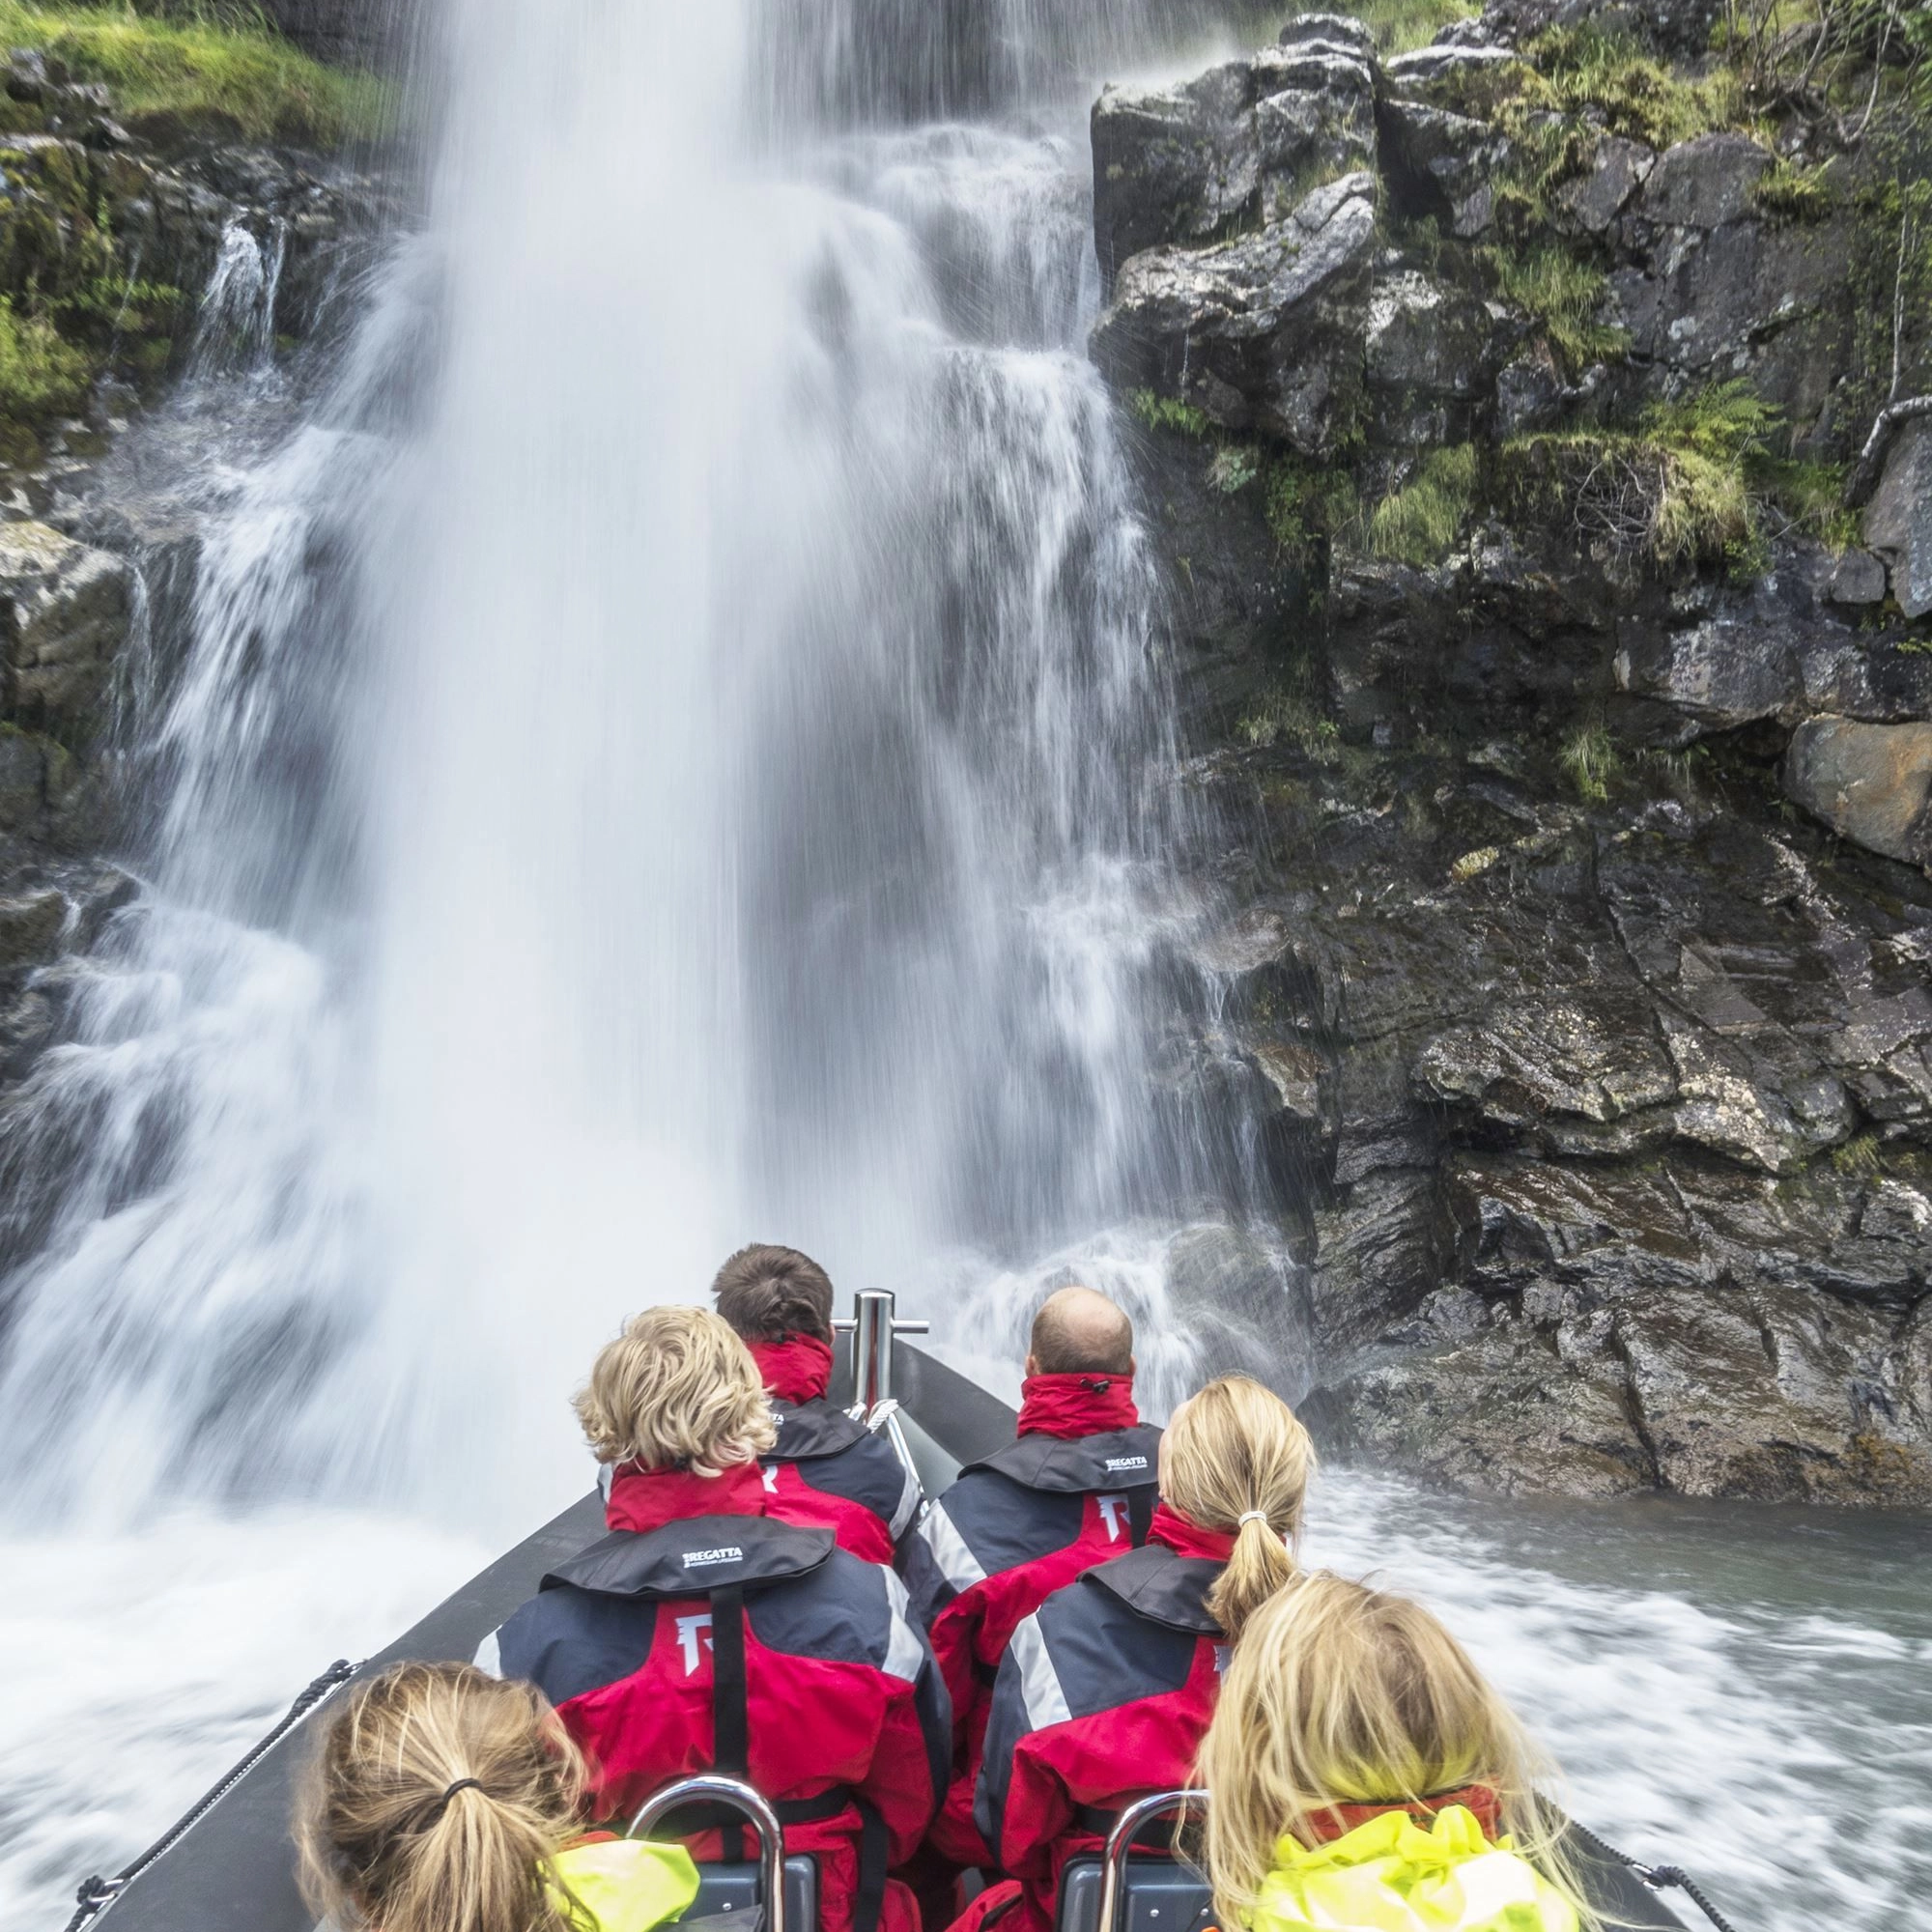 Rushing waterfalls on a RIB boat trip on the Hardangerfjord from Odda, Norway